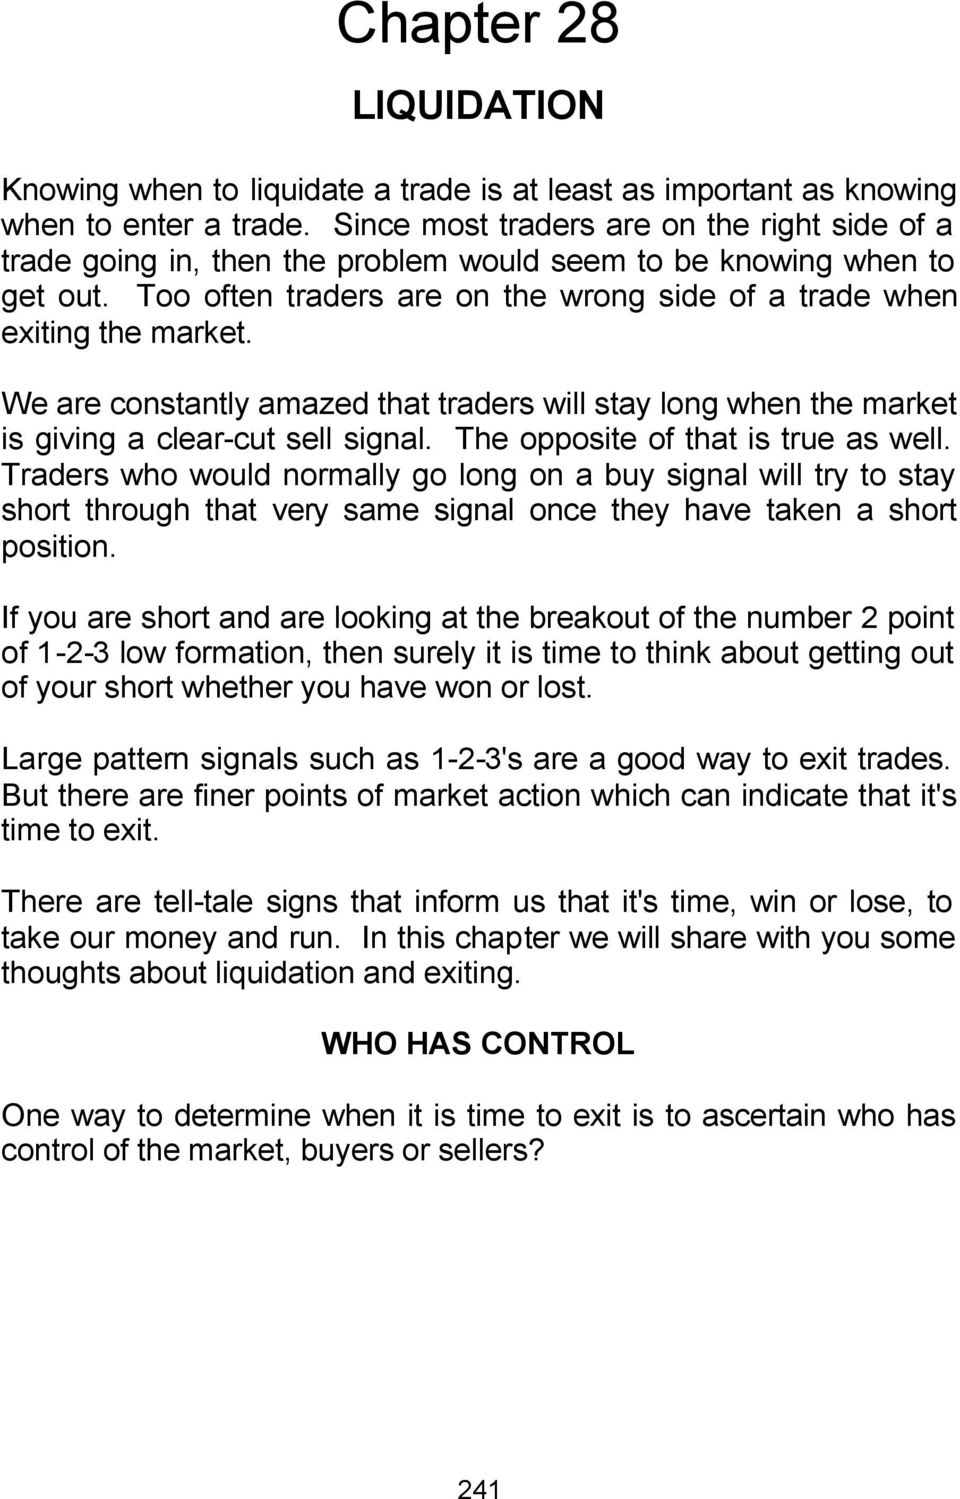 We are constantly amazed that traders will stay long when the market is giving a clear-cut sell signal. The opposite of that is true as well.